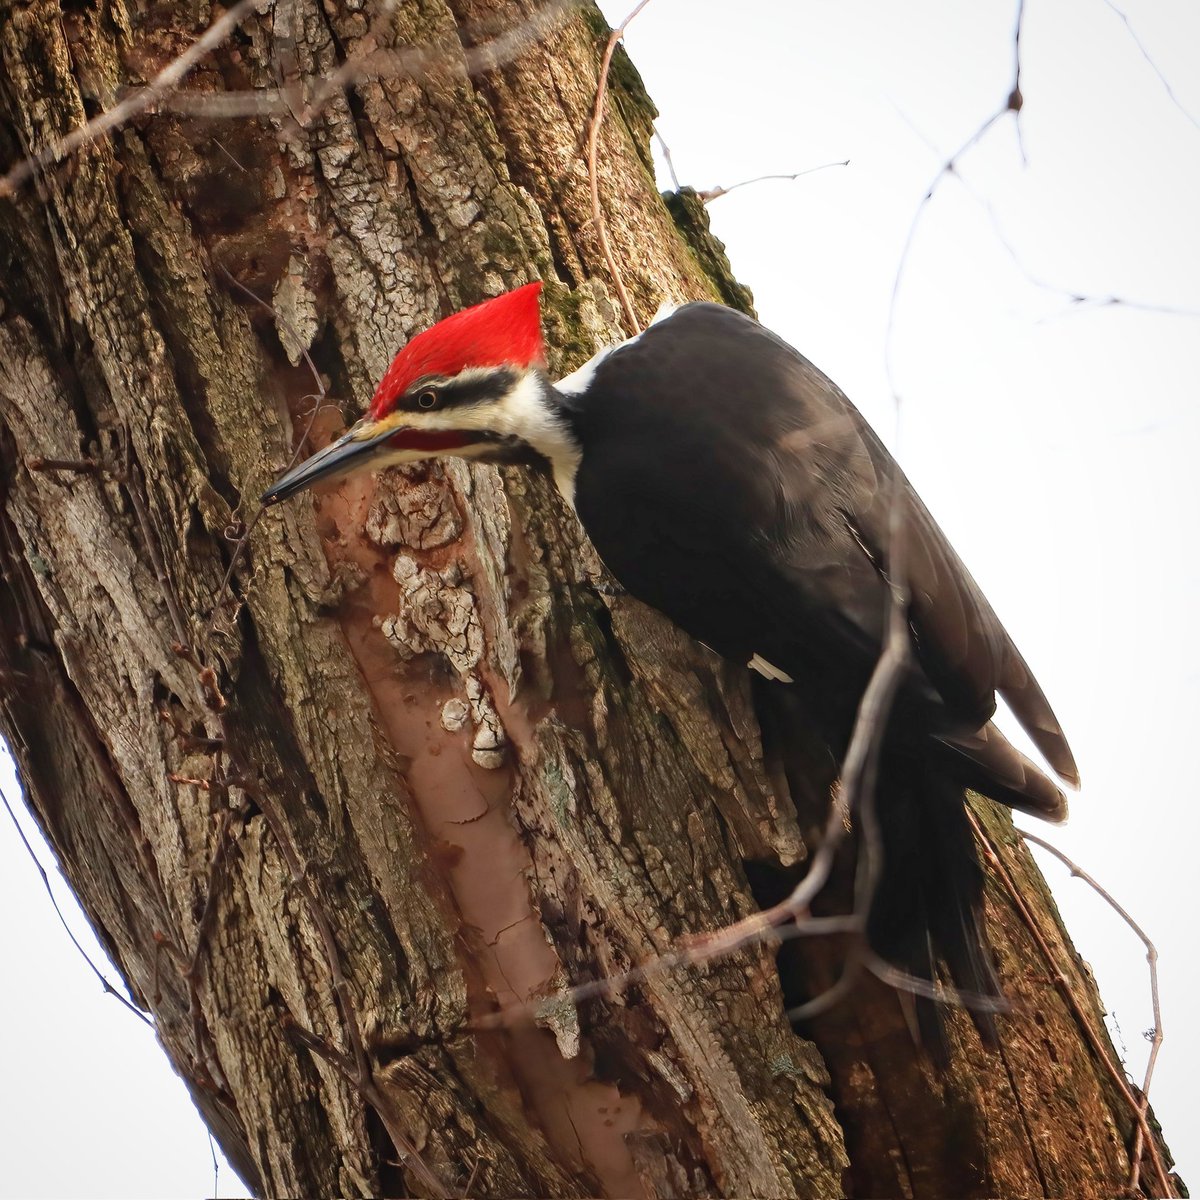 I love seeing this handsome male pileated woodpecker out and about! I have also seen the female pileated woodpecker visiting our suet feeders.
#pileatedwoodpeckers #pileatedwoodpecker #pileated #woodpecker #woodpeckers #ohiobirding #beavercreekohio #beavercreekbirding #birding